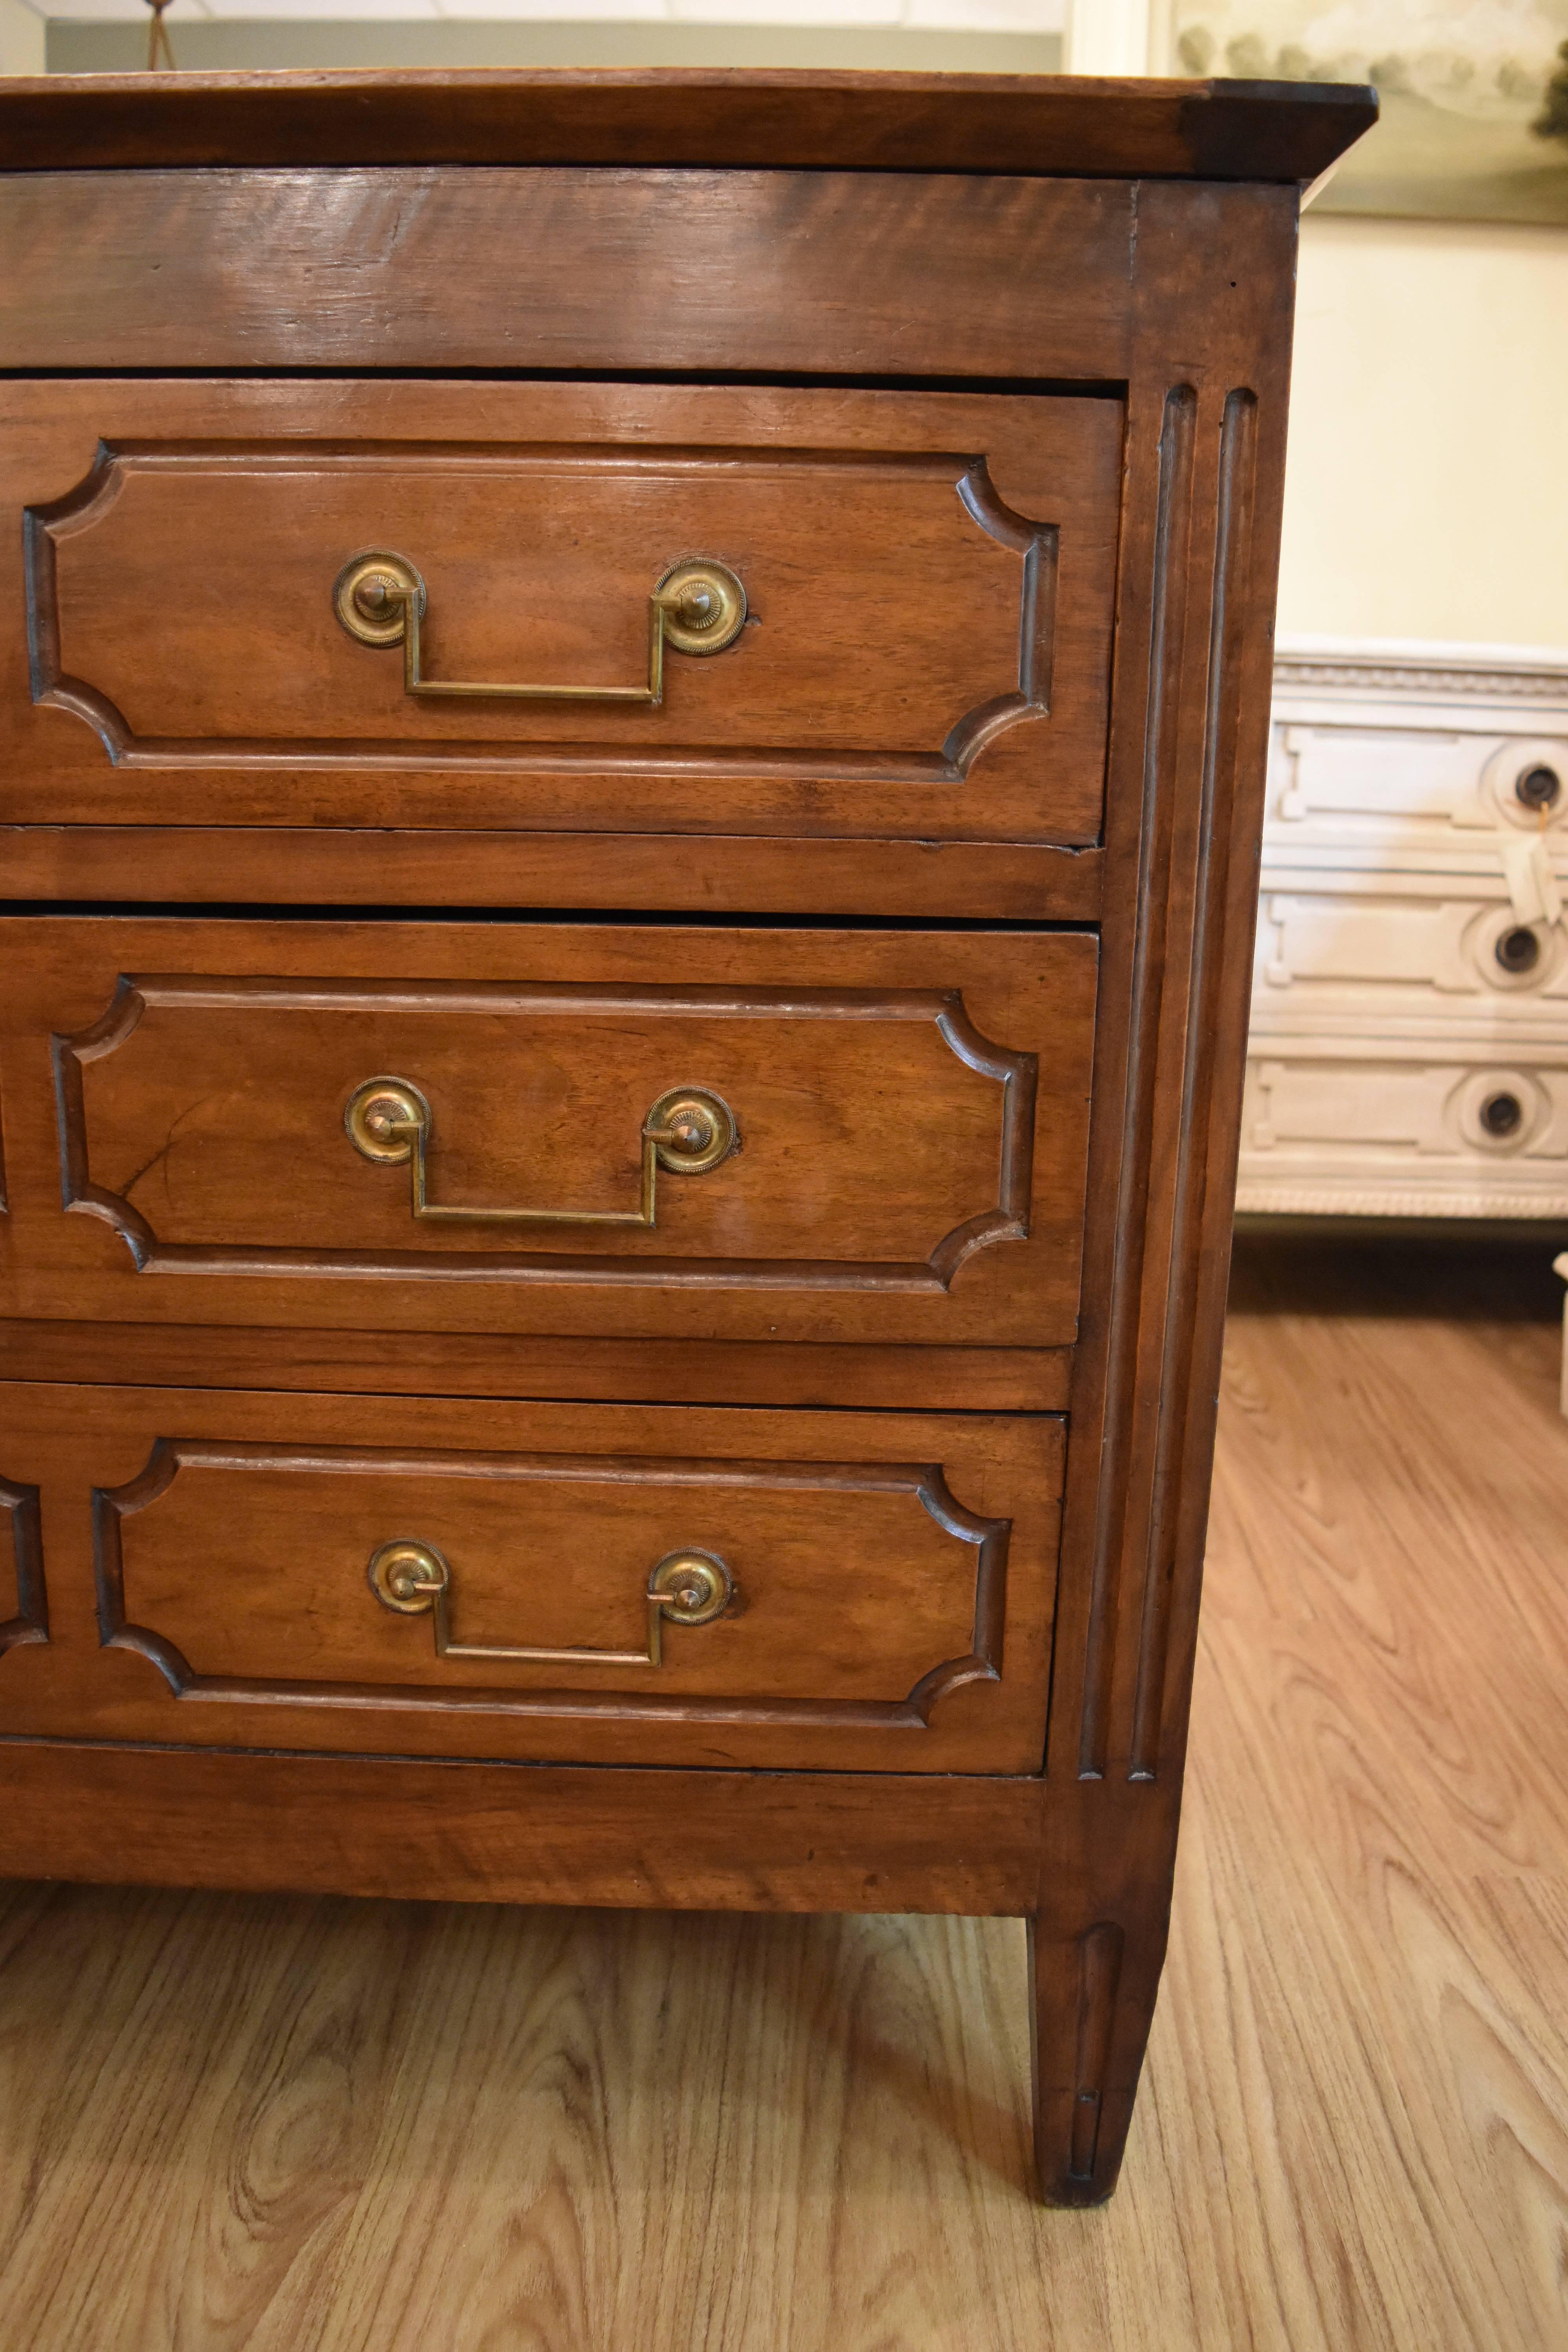 This walnut three drawer commode features tapered legs and beautiful brass hardware. The drawer design is geometric and would mix well with today's more transitional decor.